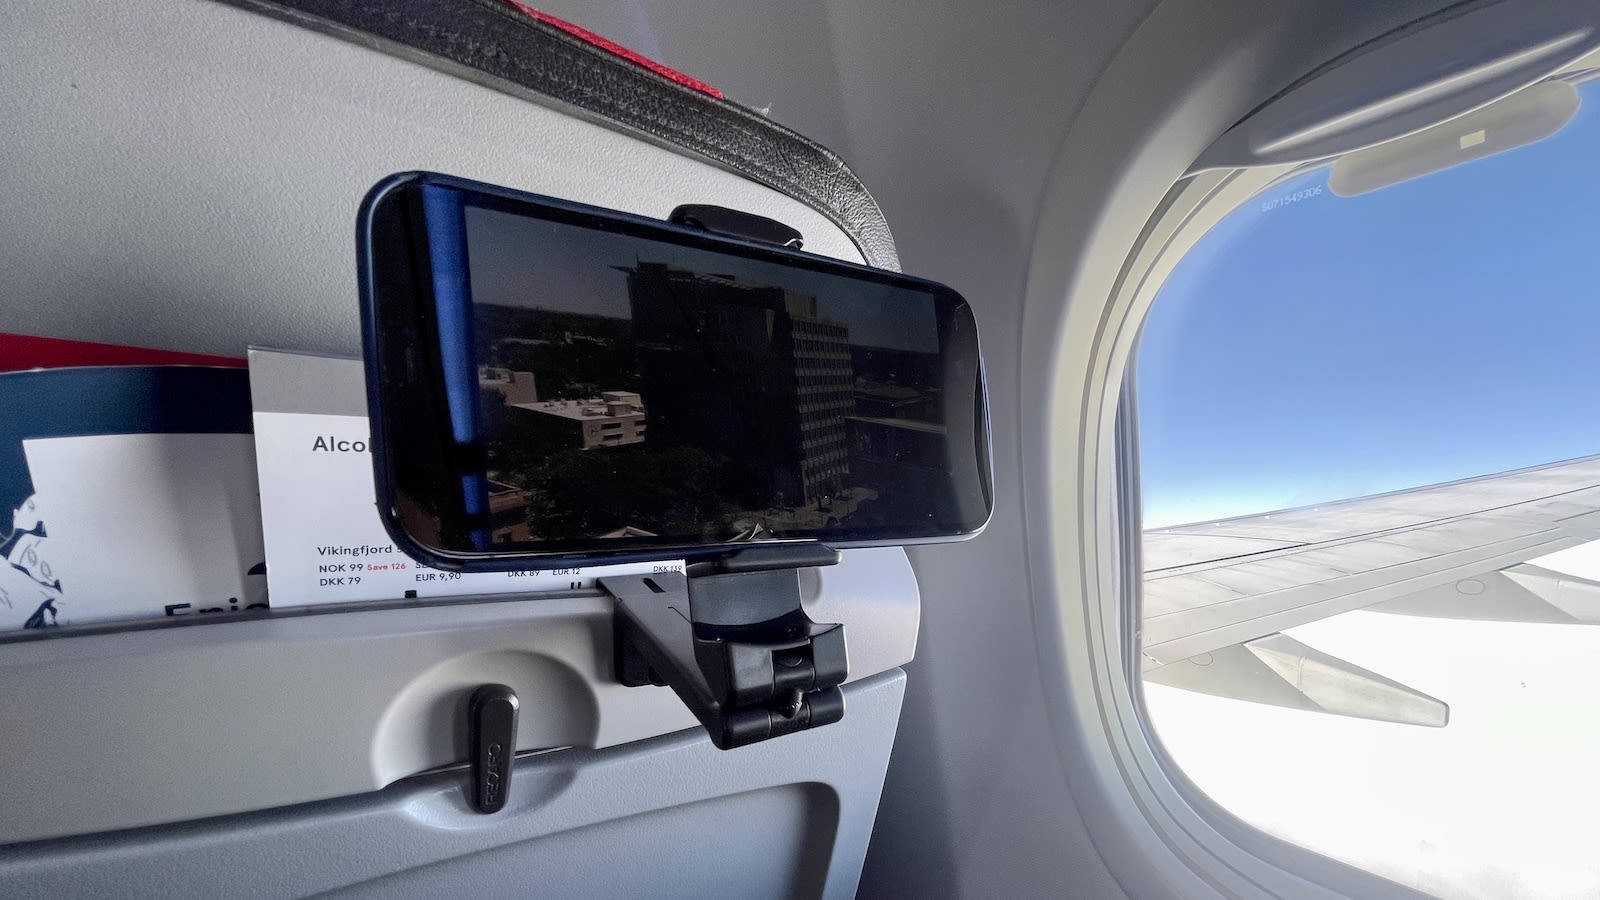 The Perilogics universal airplane phone holder mount review